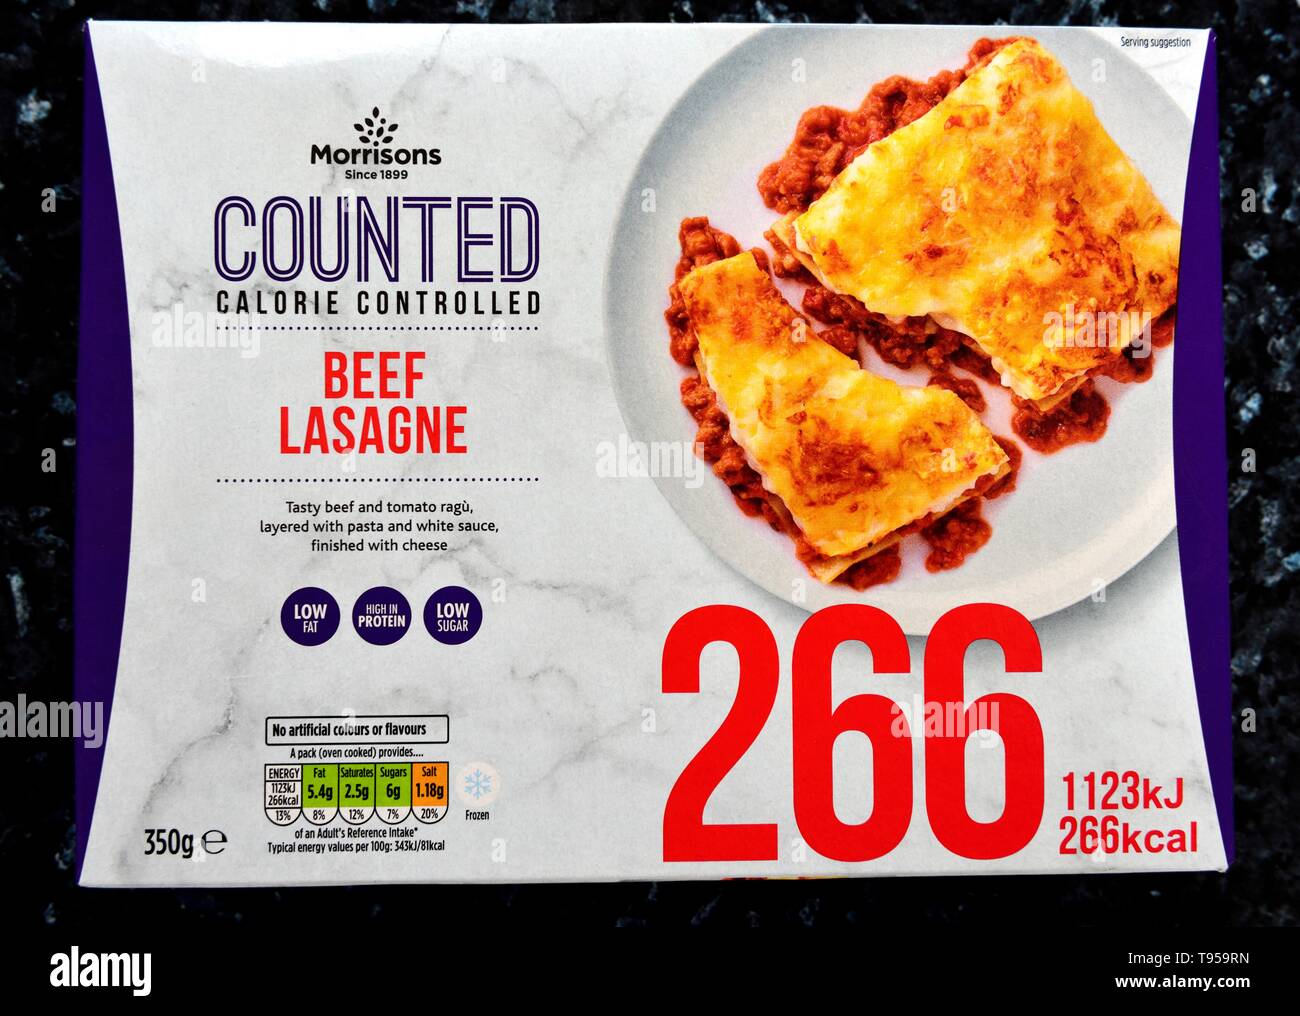 Calorie Controlled, Beef Lasagne, Microwave ready meal,266kcal,low fat,low sugar Stock Photo